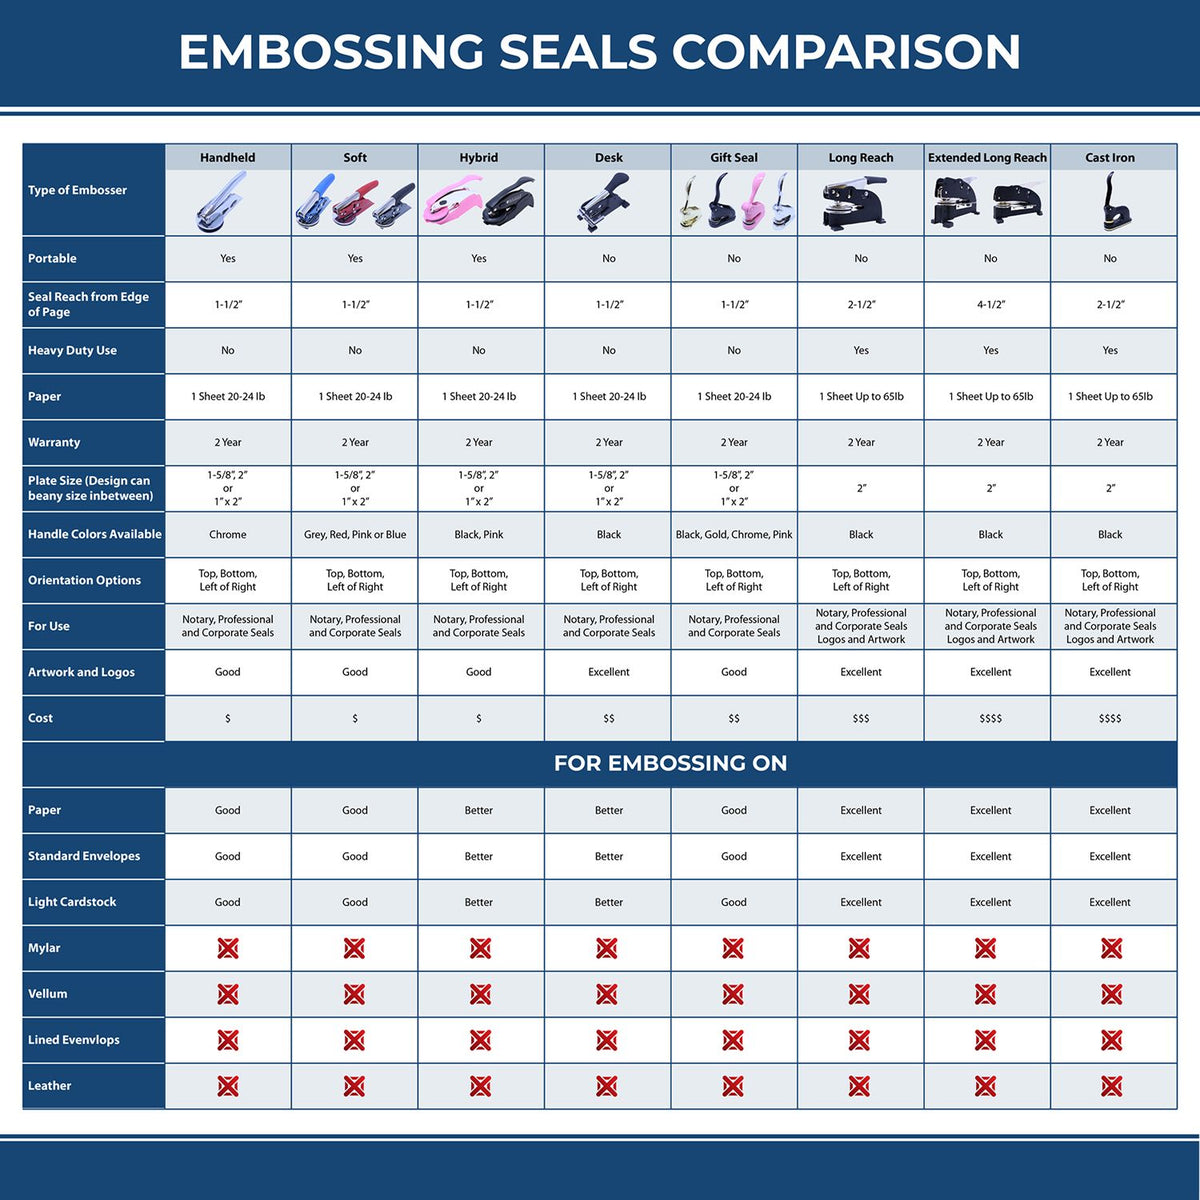 A comparison chart for the different types of mount models available for the Soft South Carolina Professional Engineer Seal.